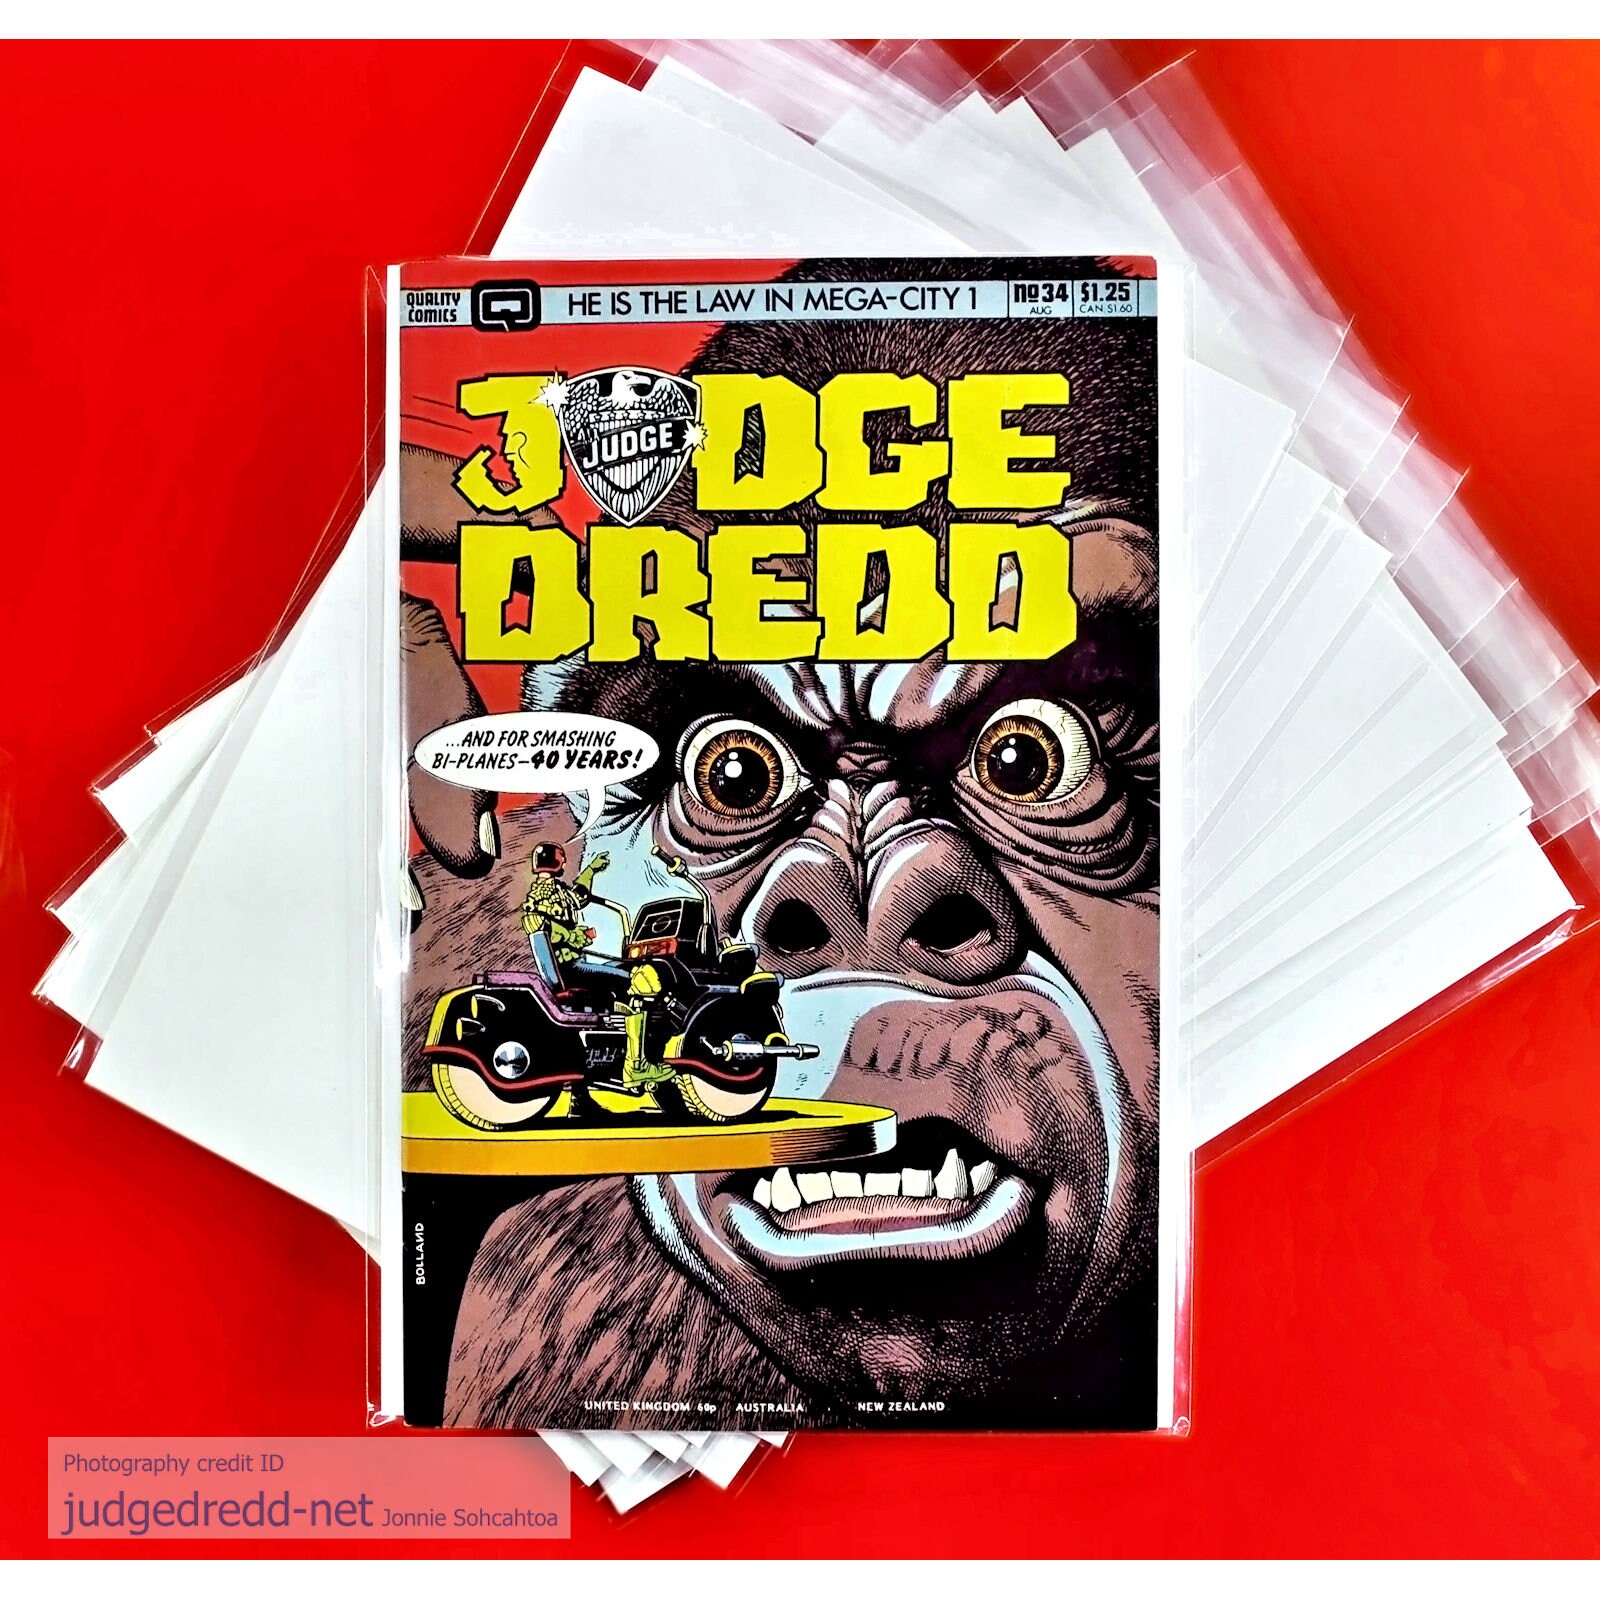 2000 AD Comic Bags and Boards Clear Sleeves and Backing Boards for British  Comic Book Issues 